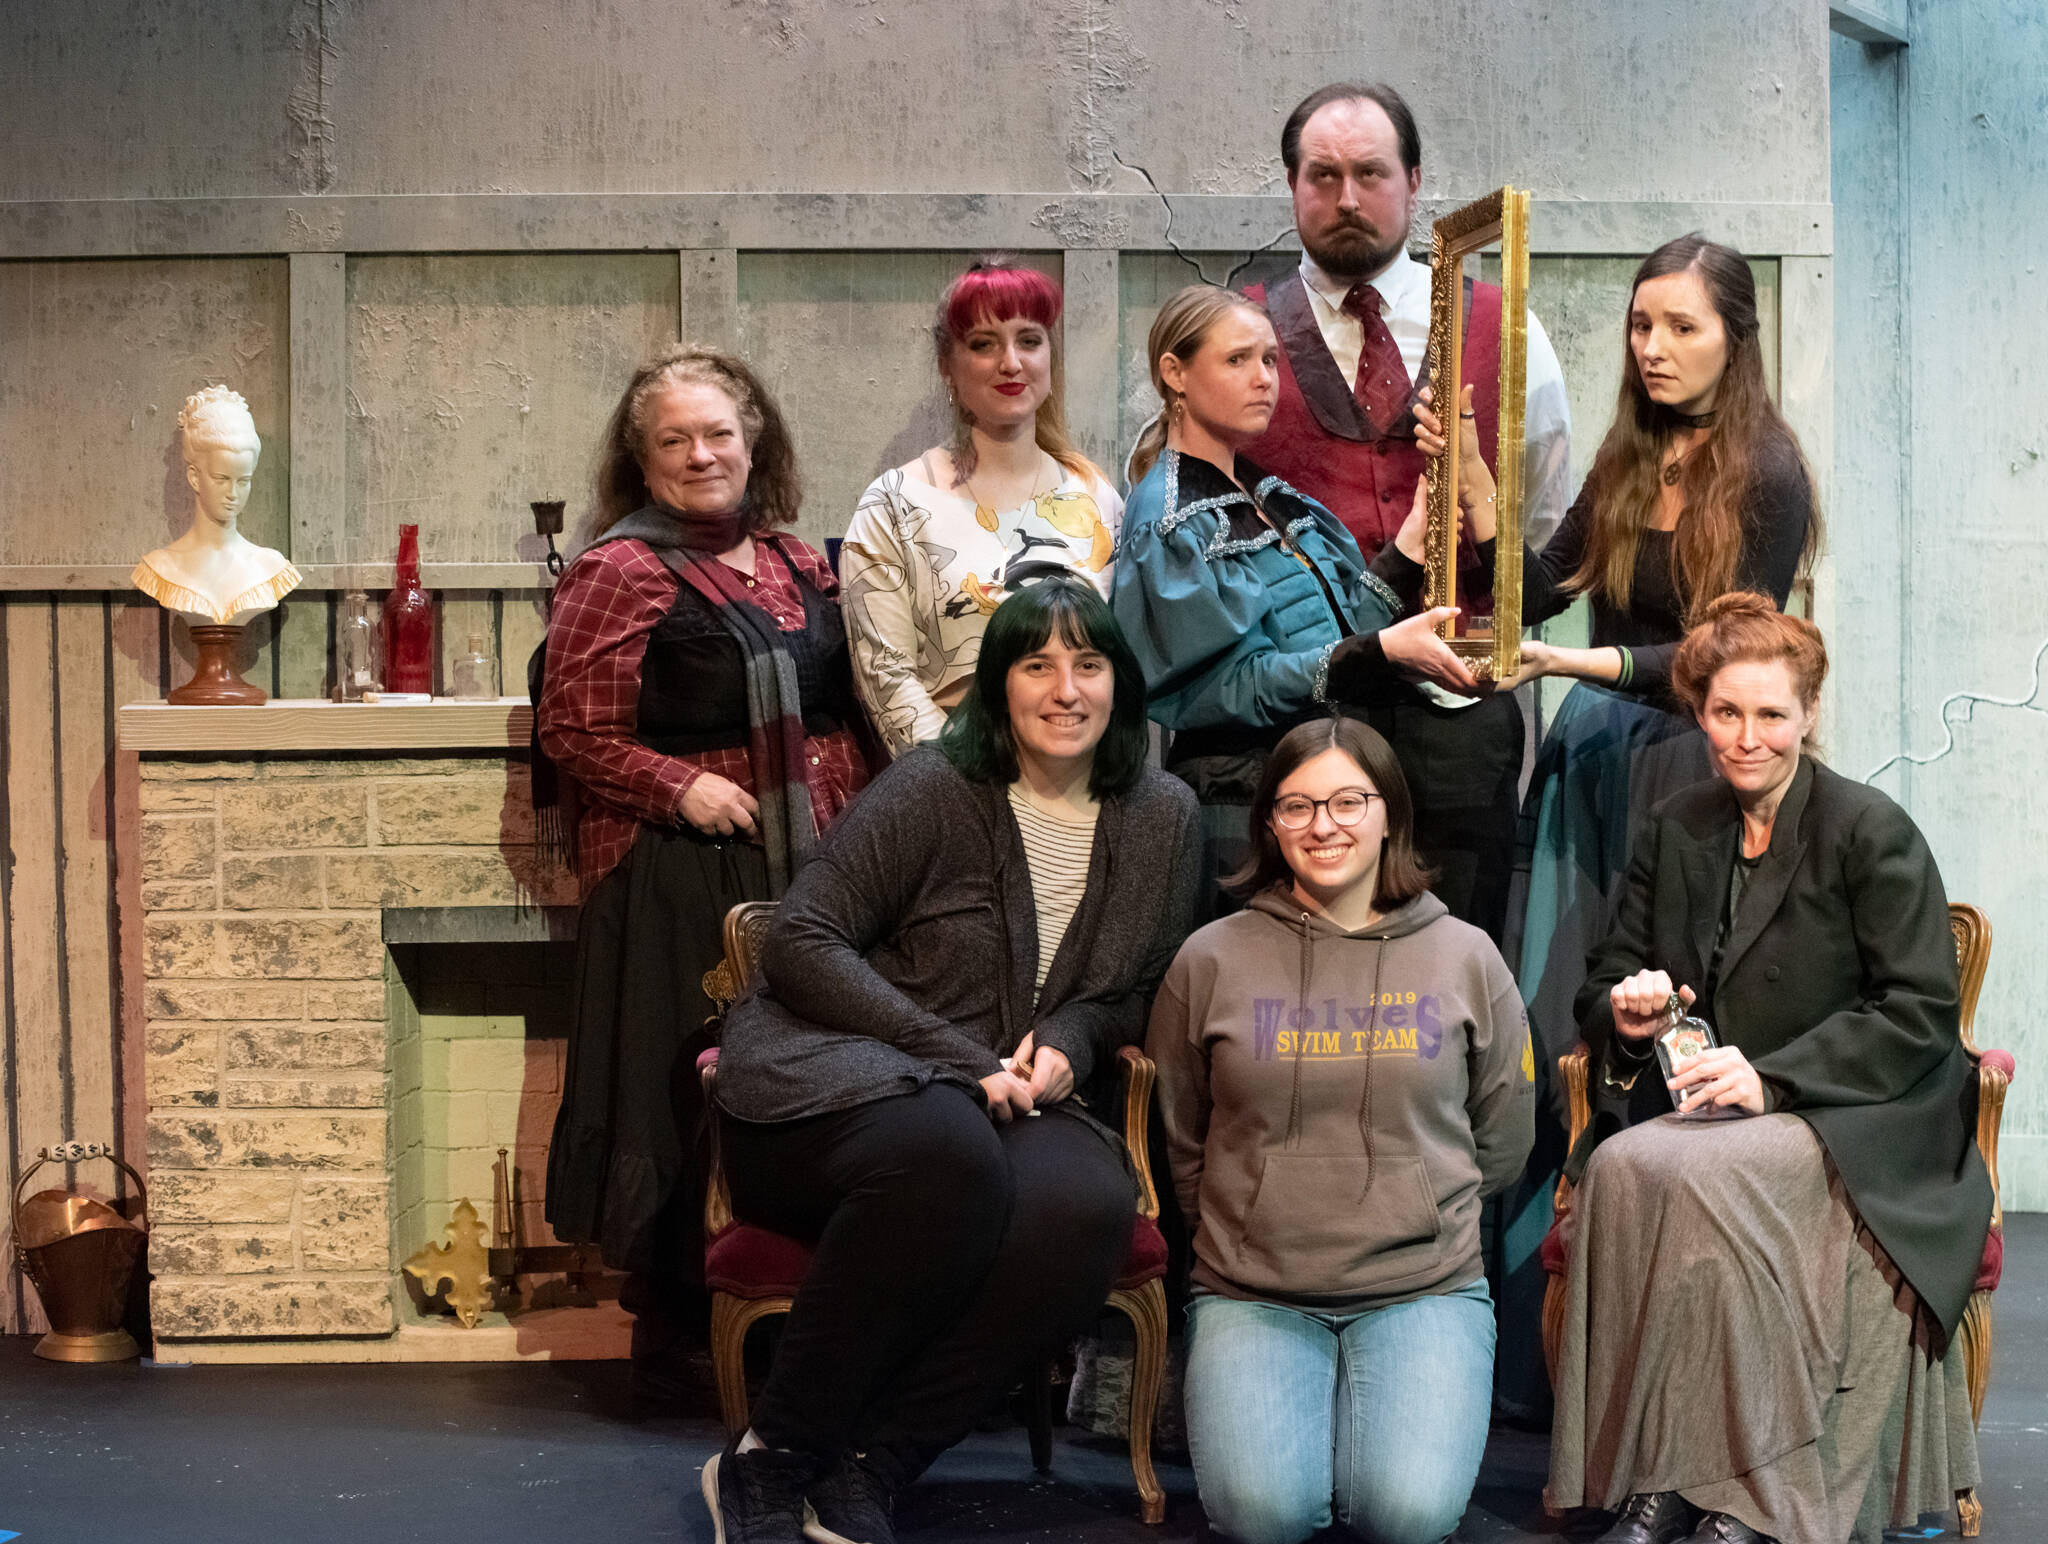 The entire cast of Olympic Theatre Arts’ upcoming production of Angel Street poses for a group picture with director Ginny Holladay, sitting on left and stage manager Madelyn Pickens, kneeling on right. Standing, from left to right are actors Julie Borden, Danielle Kolste, Sierra Brittal, Sean Stone and Angie Roiniotis. On the far right, sitting, is Maude Eisele. Sequim Gazette photo by Emily Matthiessen